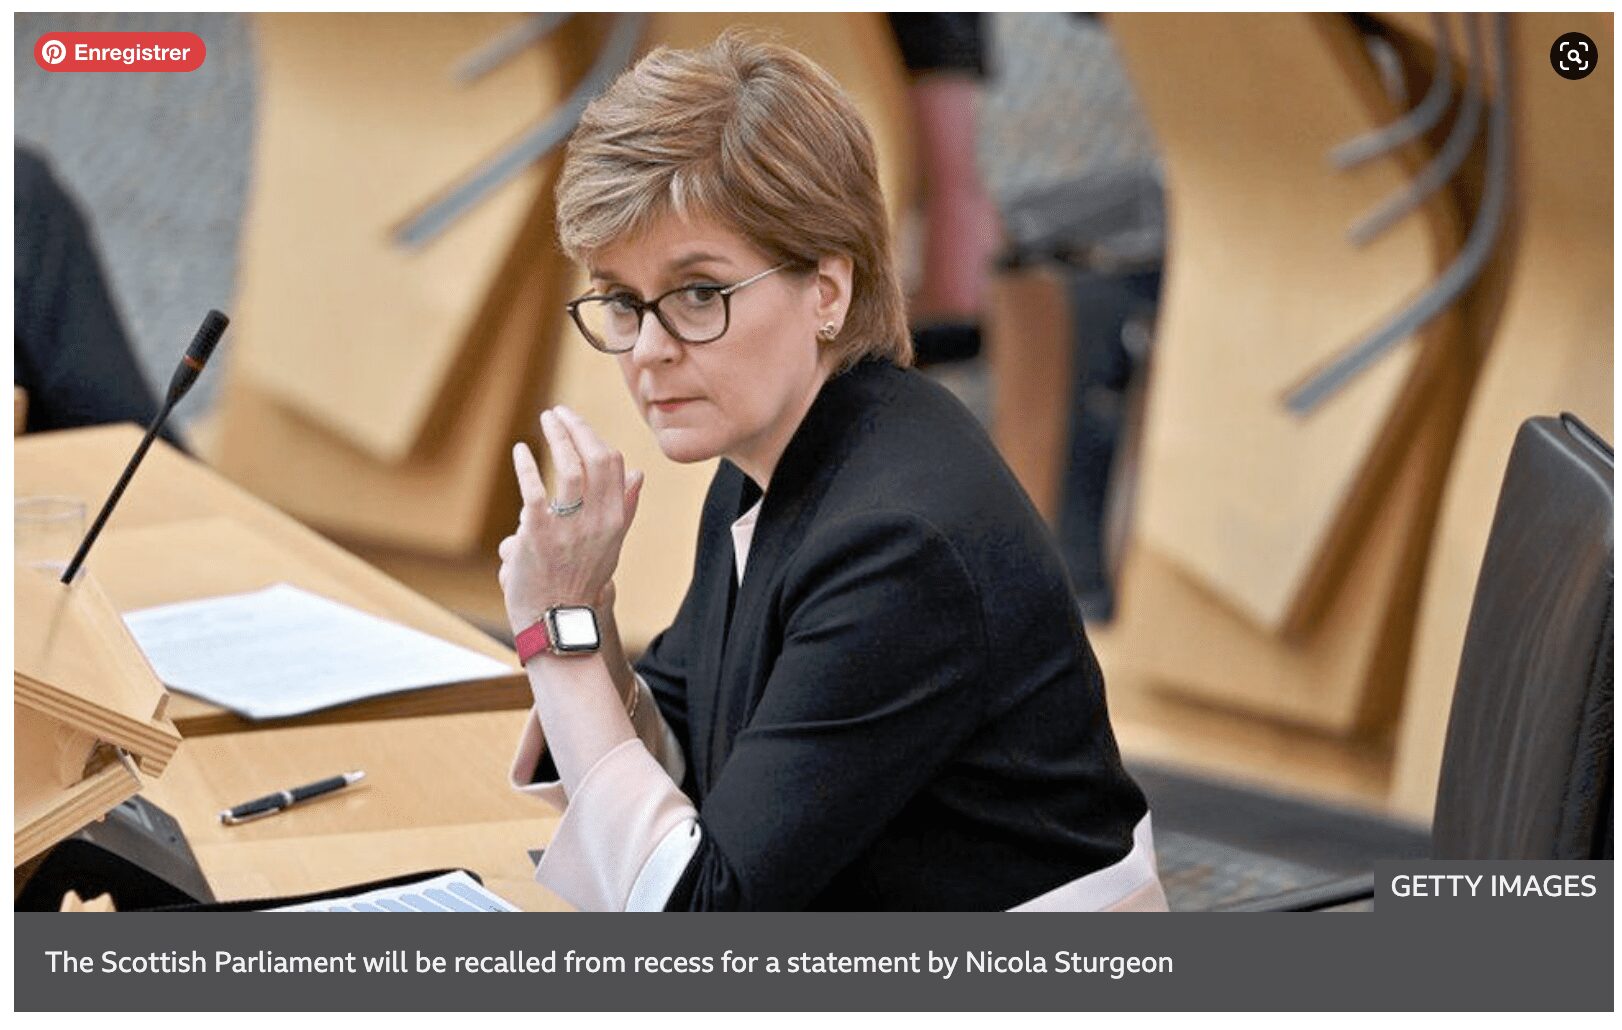 Covid in Scotland: Nicola Sturgeon to set out plans for lifting restrictions